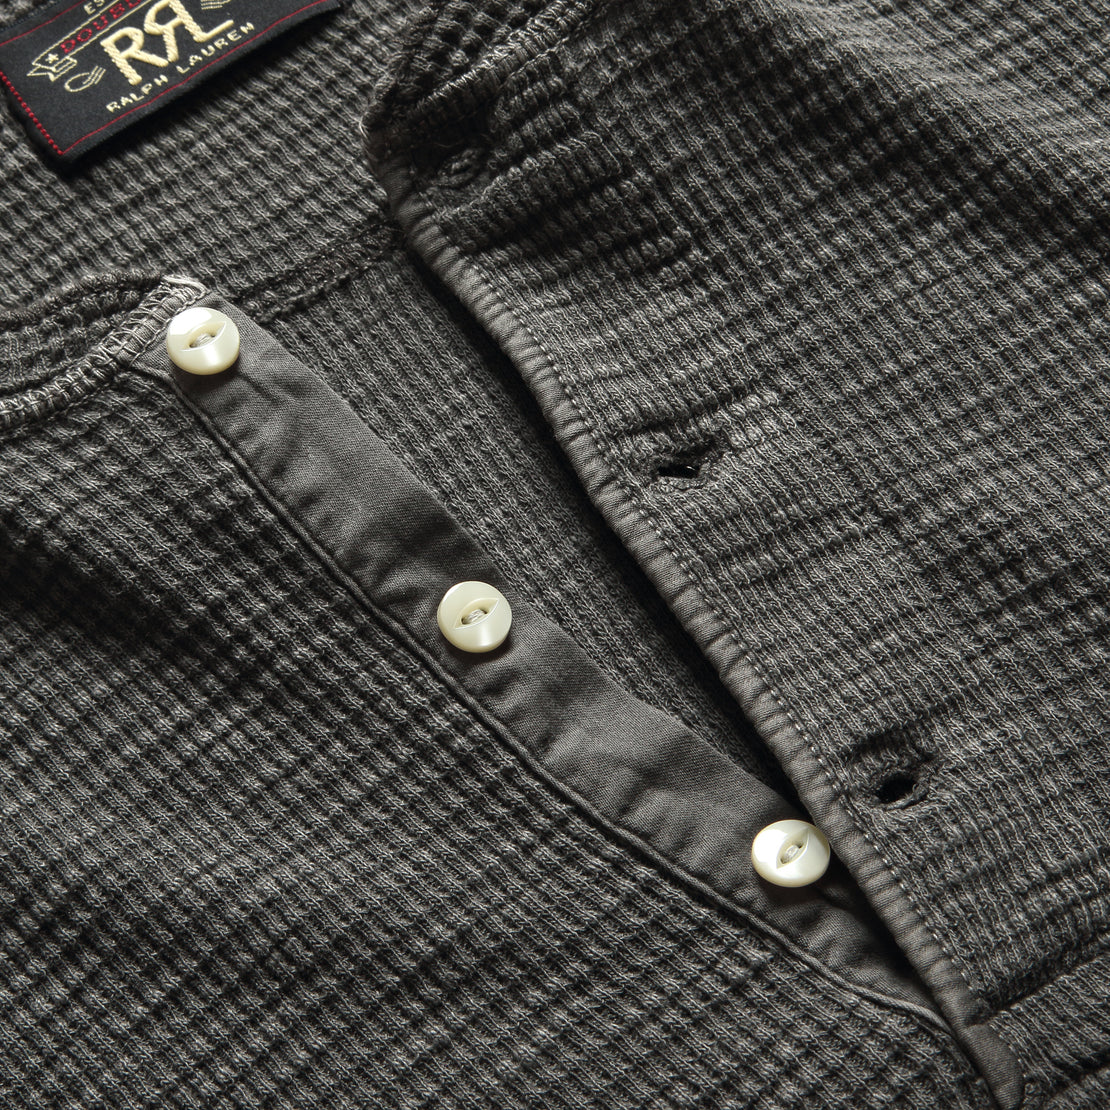 Waffle-Knit Henley - Faded Black - RRL - STAG Provisions - Tops - L/S Knit